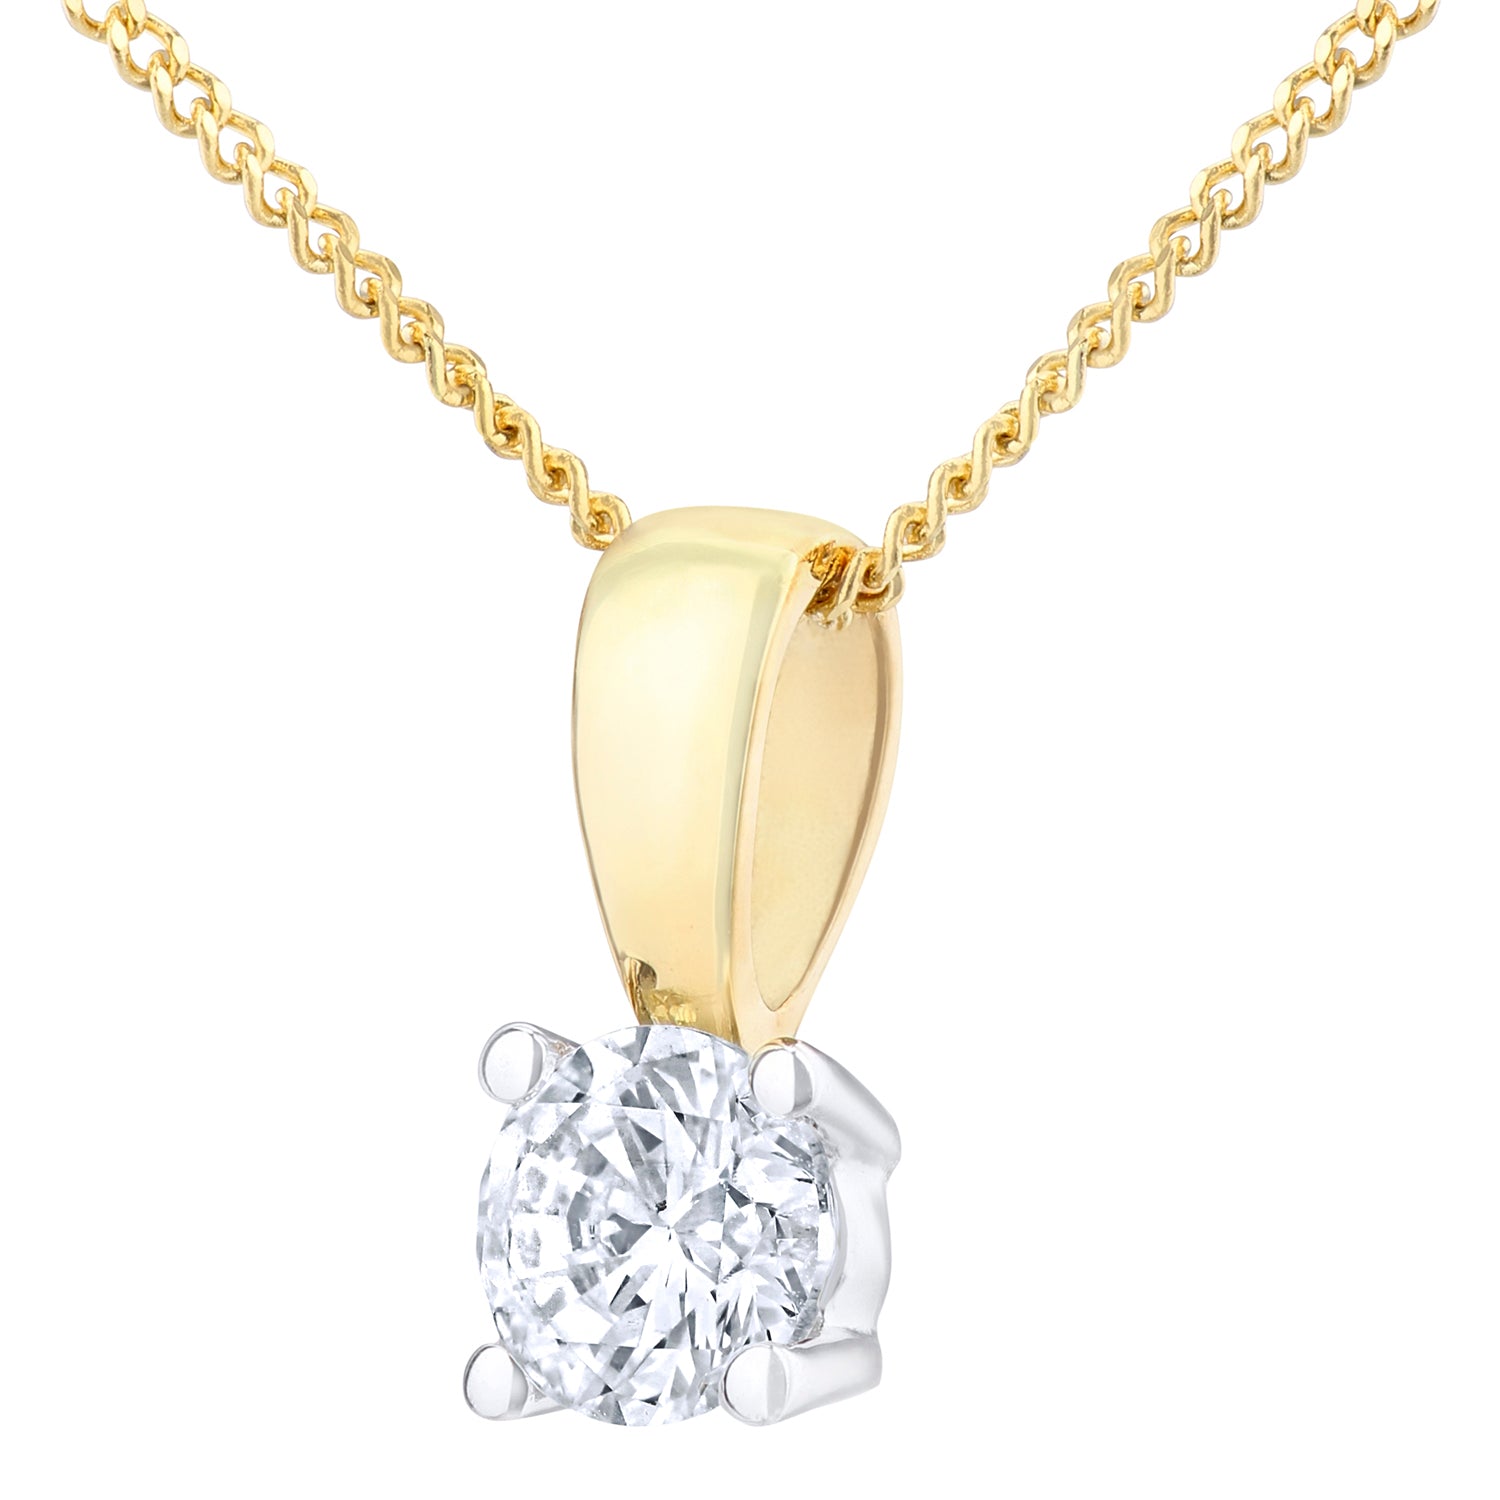 18ct Gold  Round 1/4ct Diamond Solitaire Pendant Necklace 18 inch - PP0AXL4203Y18HSI